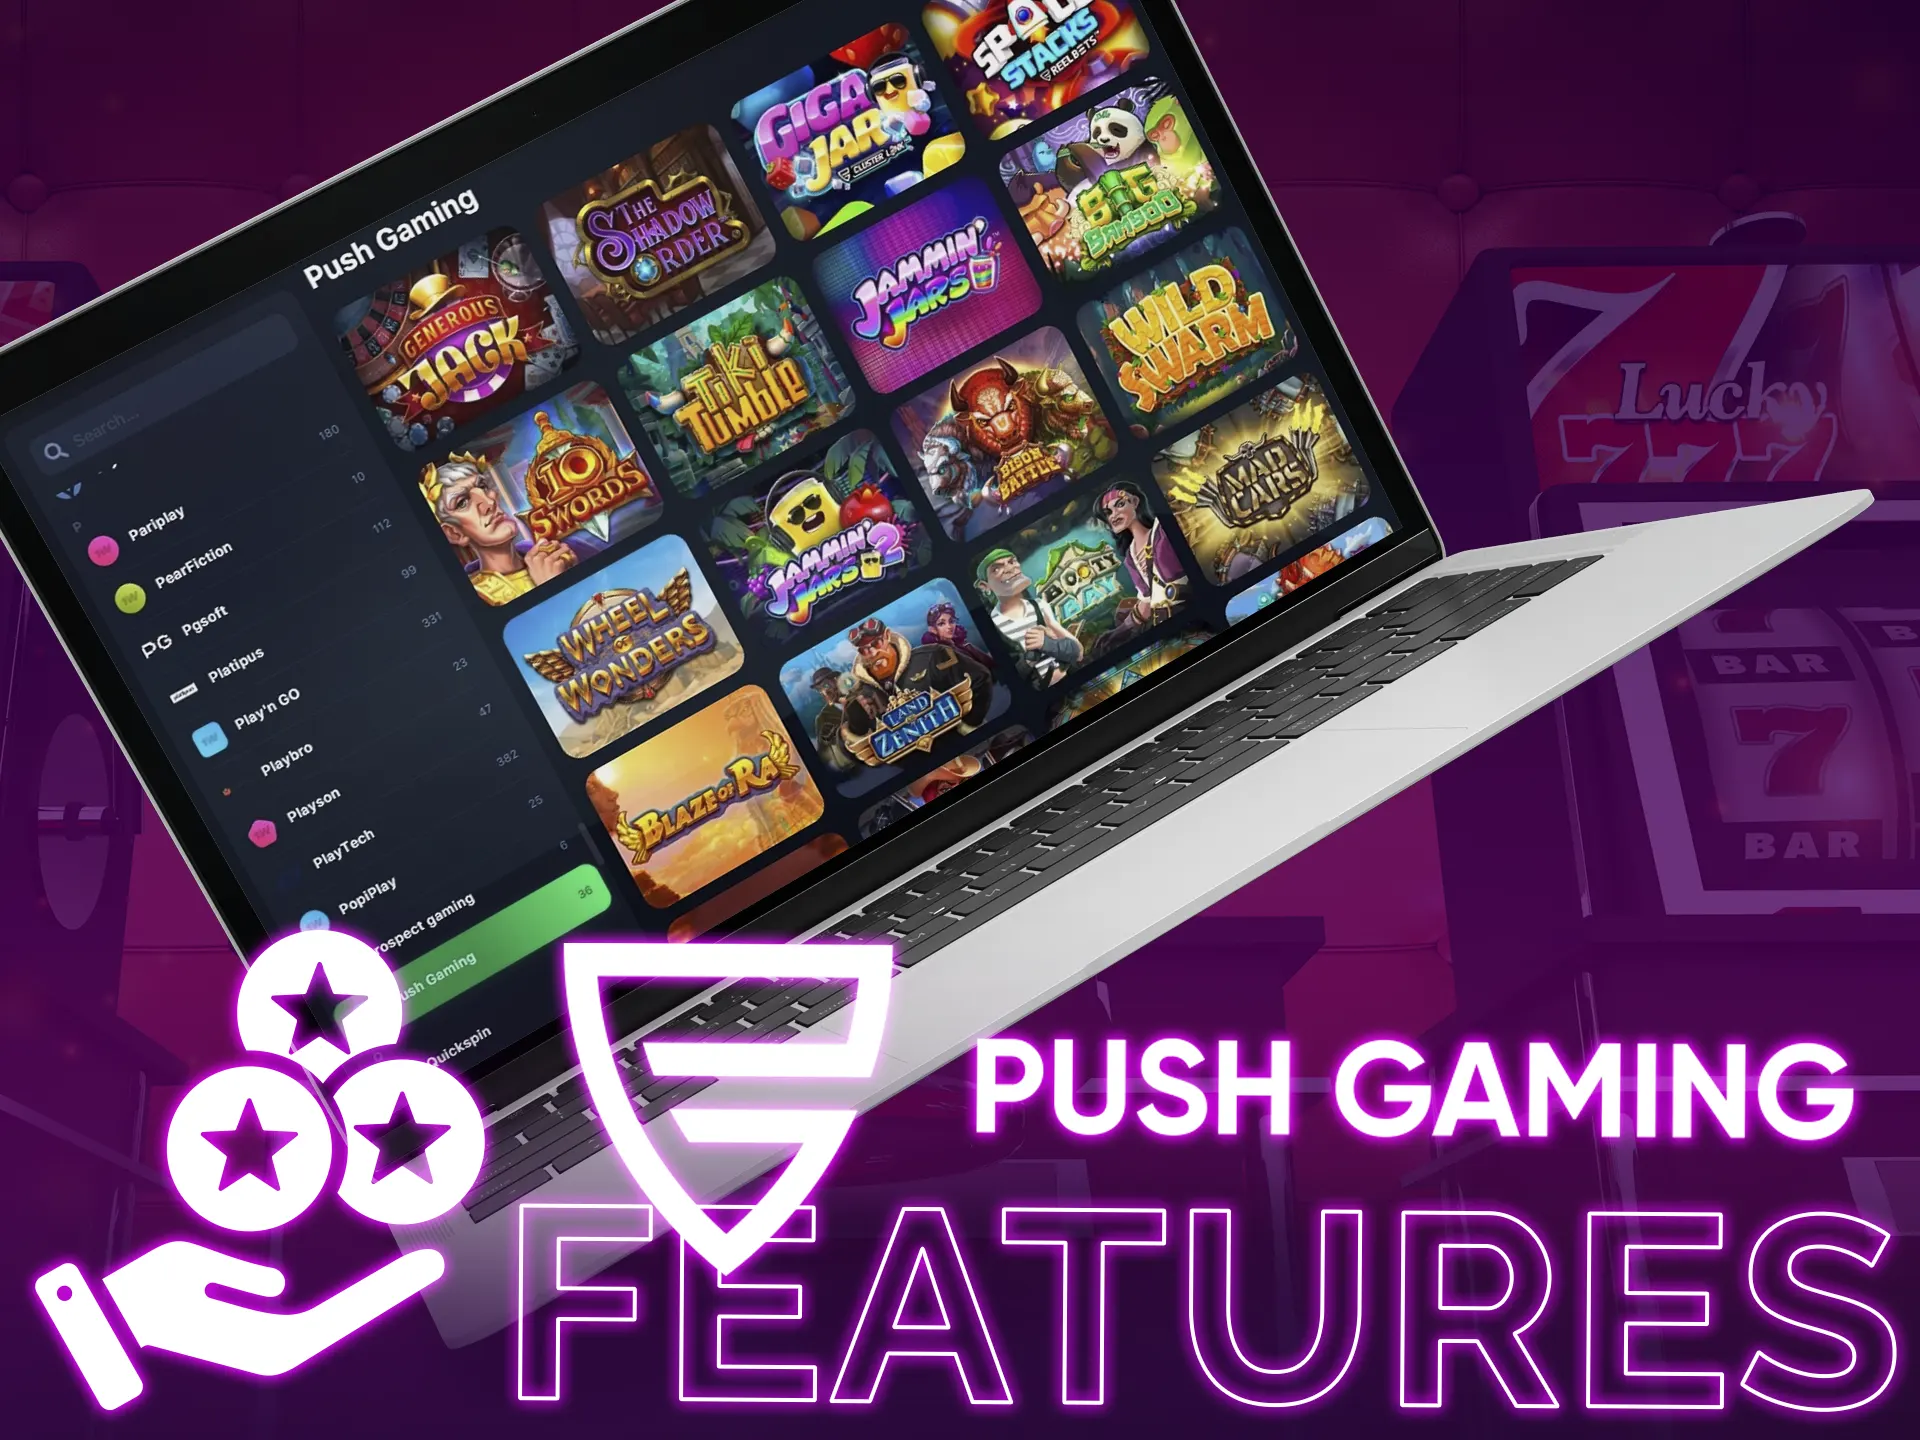 Learn other features of the Push Provider games.